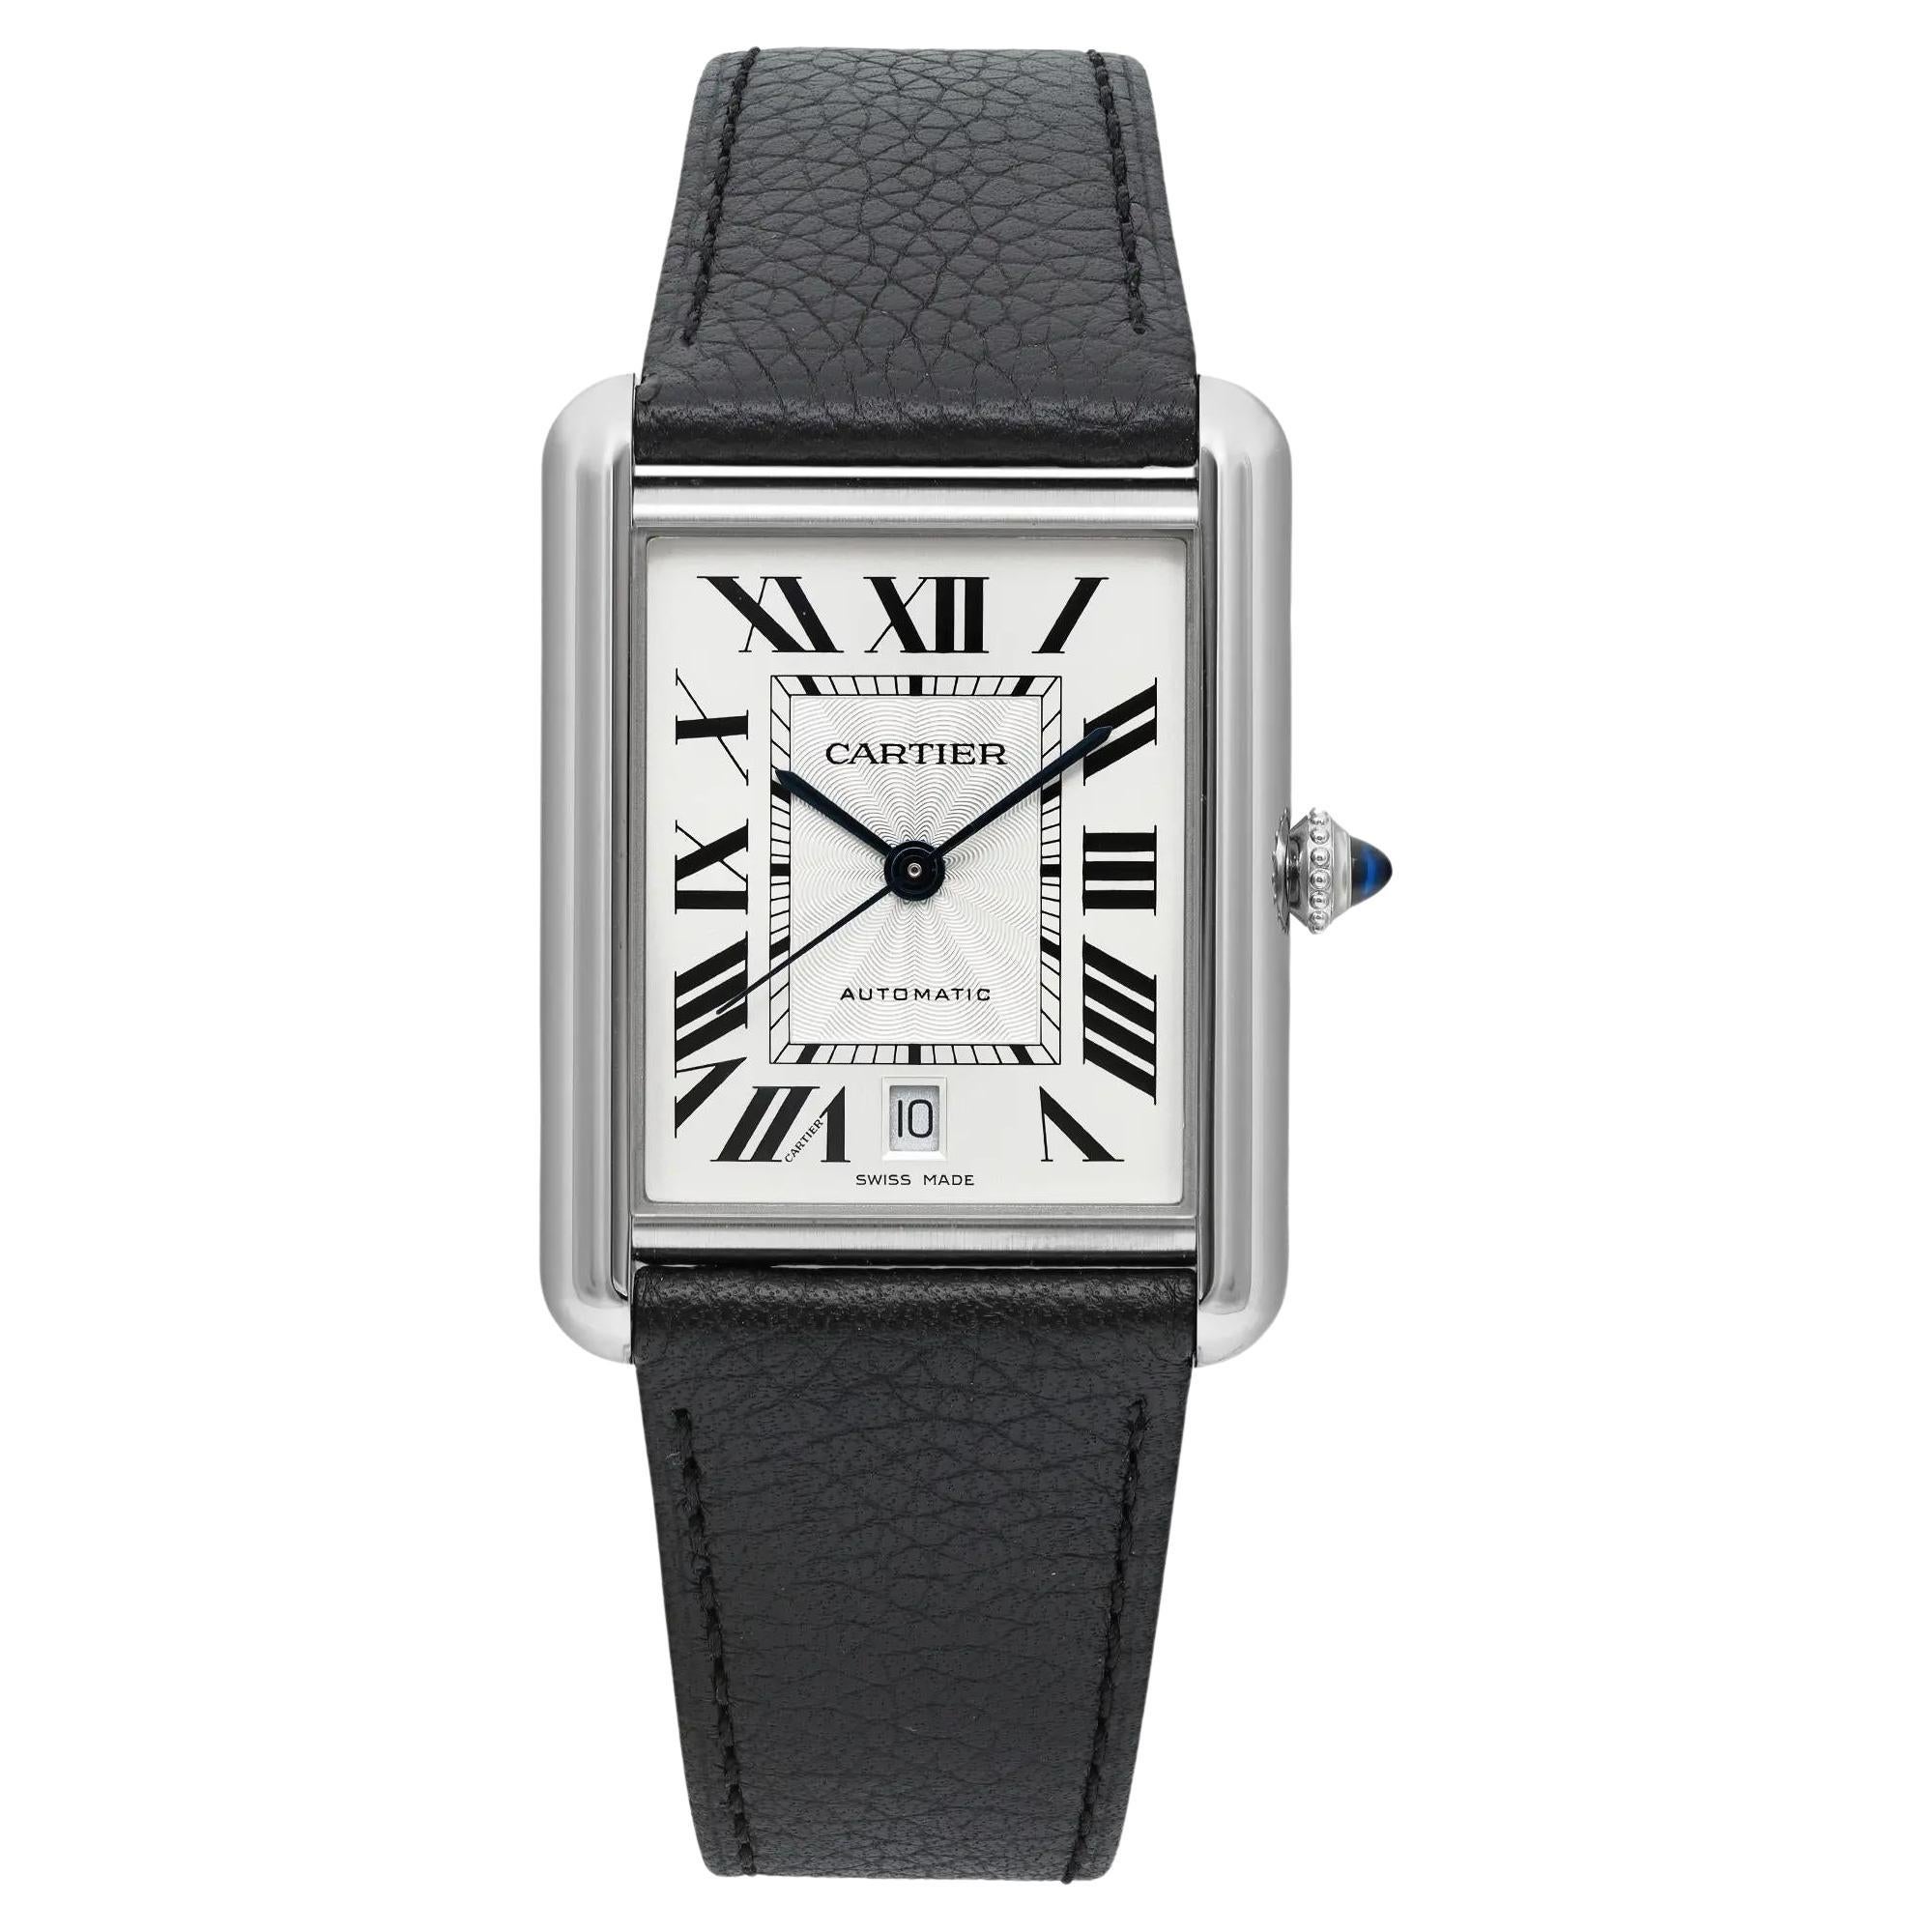 How do I know what Cartier Tank watch I have?